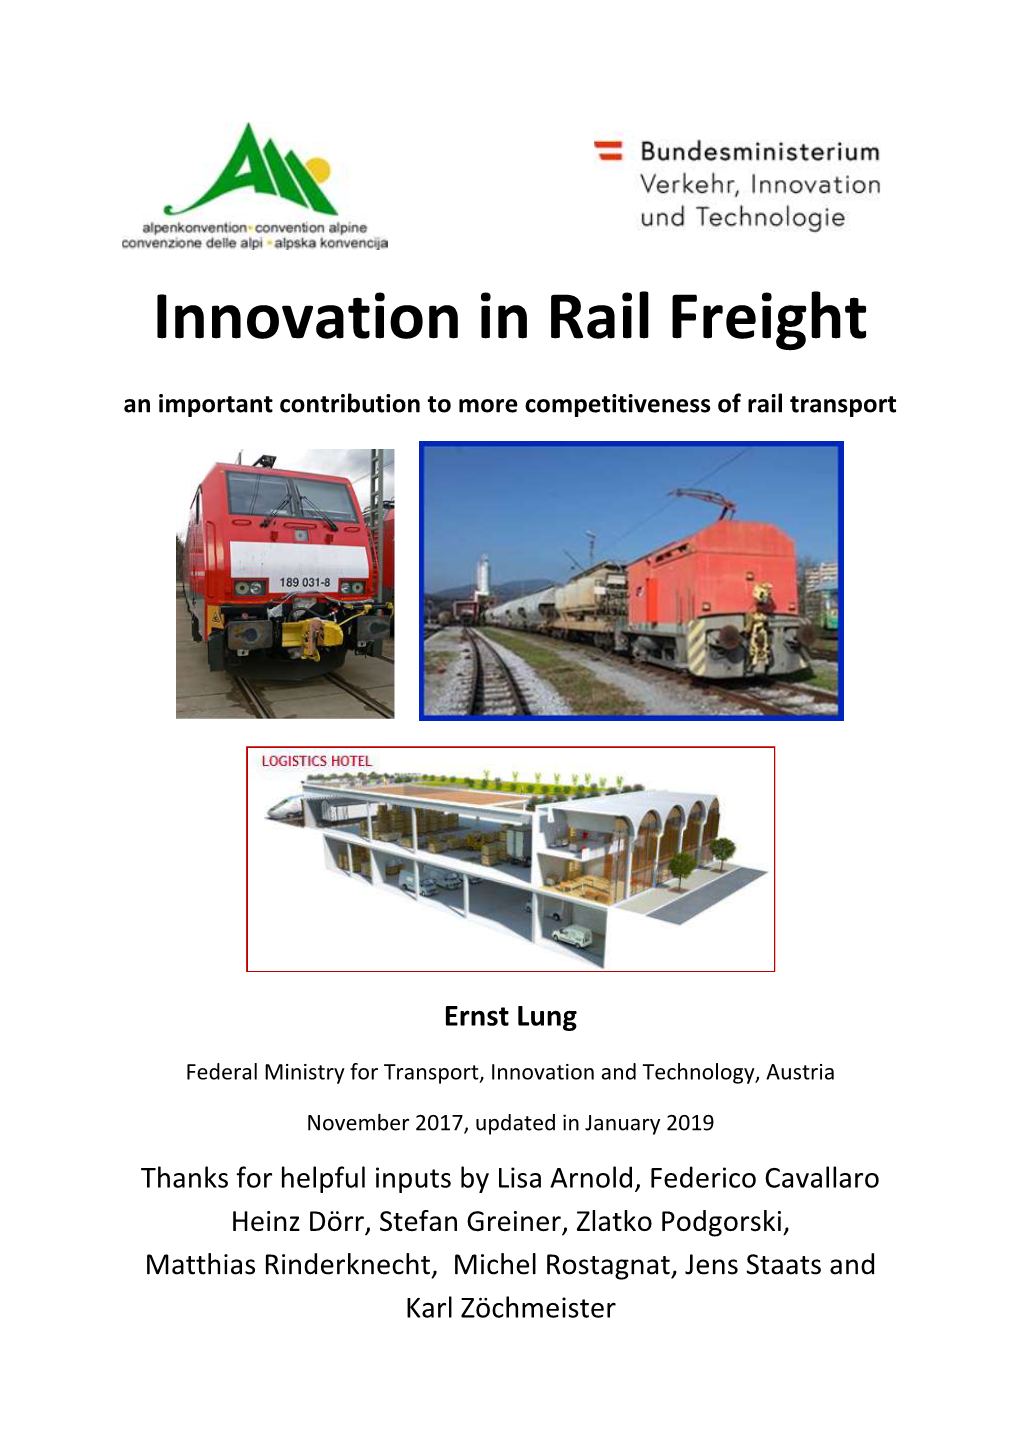 Innovation in Rail Freight an Important Contribution to More Competitiveness of Rail Transport